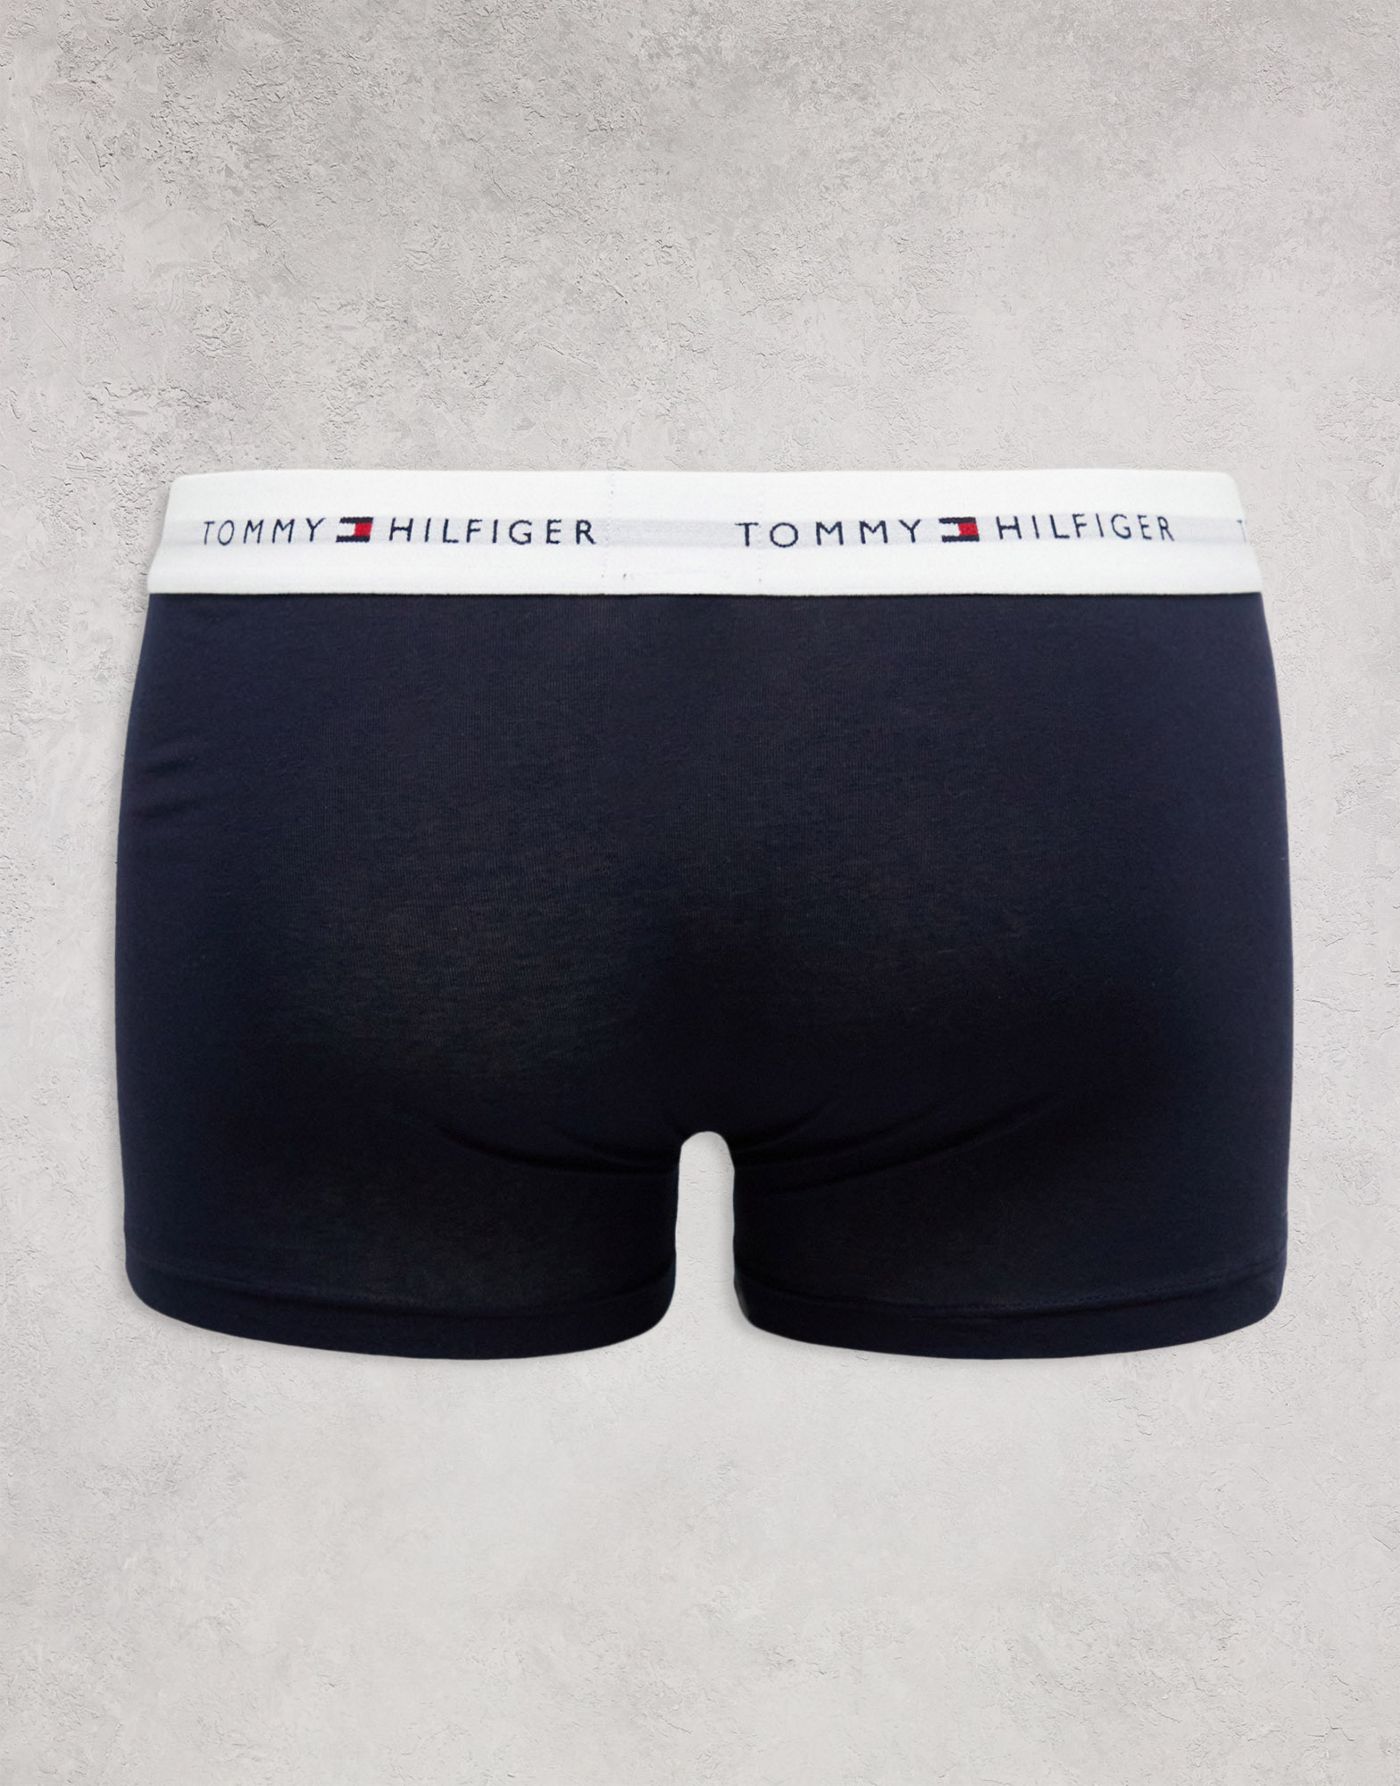 Tommy Hilfiger 5 pack trunks in multi